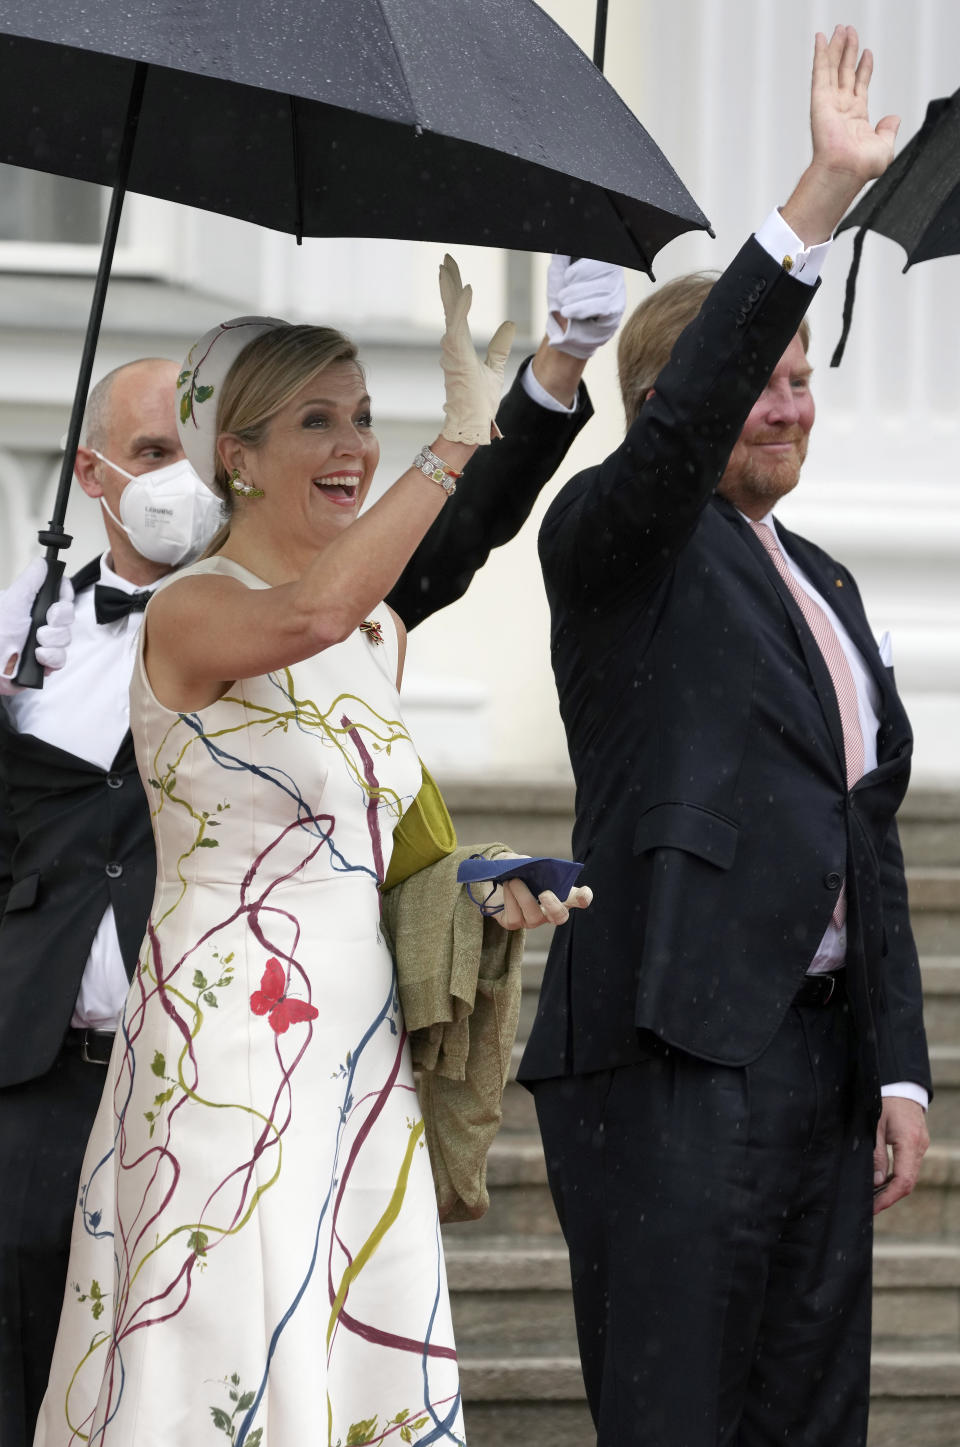 Dutch King Willem-Alexander, right and his wife Queen Maxima, front left, wave as they arrive for a meeting with German President Frank-Walter Steinmeier in Berlin, Germany, Monday, July 5, 2021. King Willem-Alexander and Queen Maxima are on a three day visit in Germany. (AP Photo/Michael Sohn)